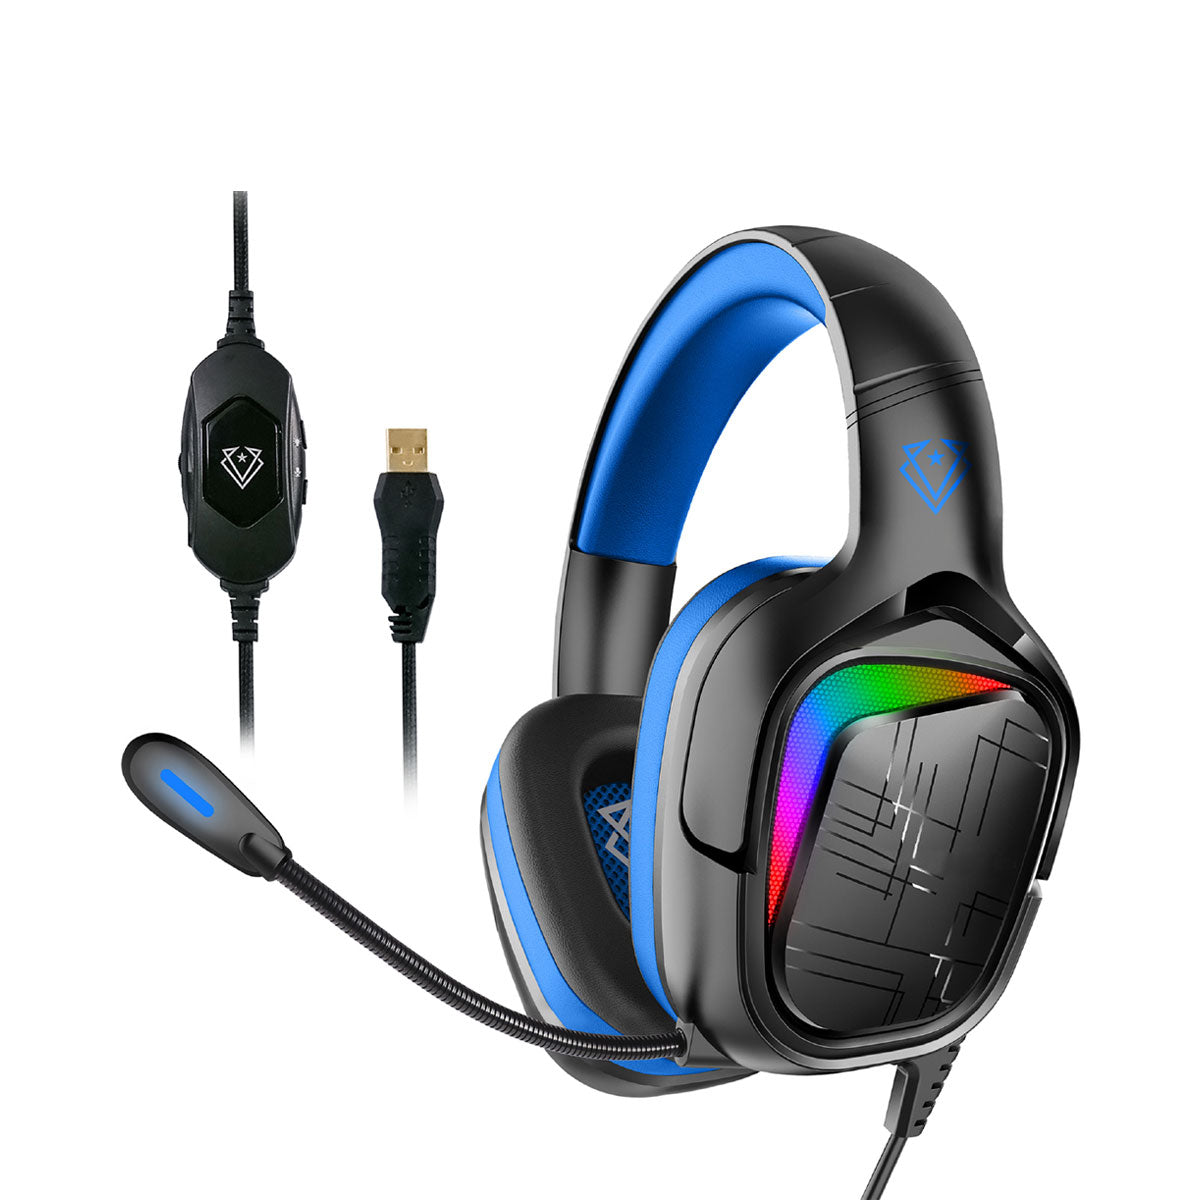 High Performance 7.1 Stereo Sound Pro Gaming Headset